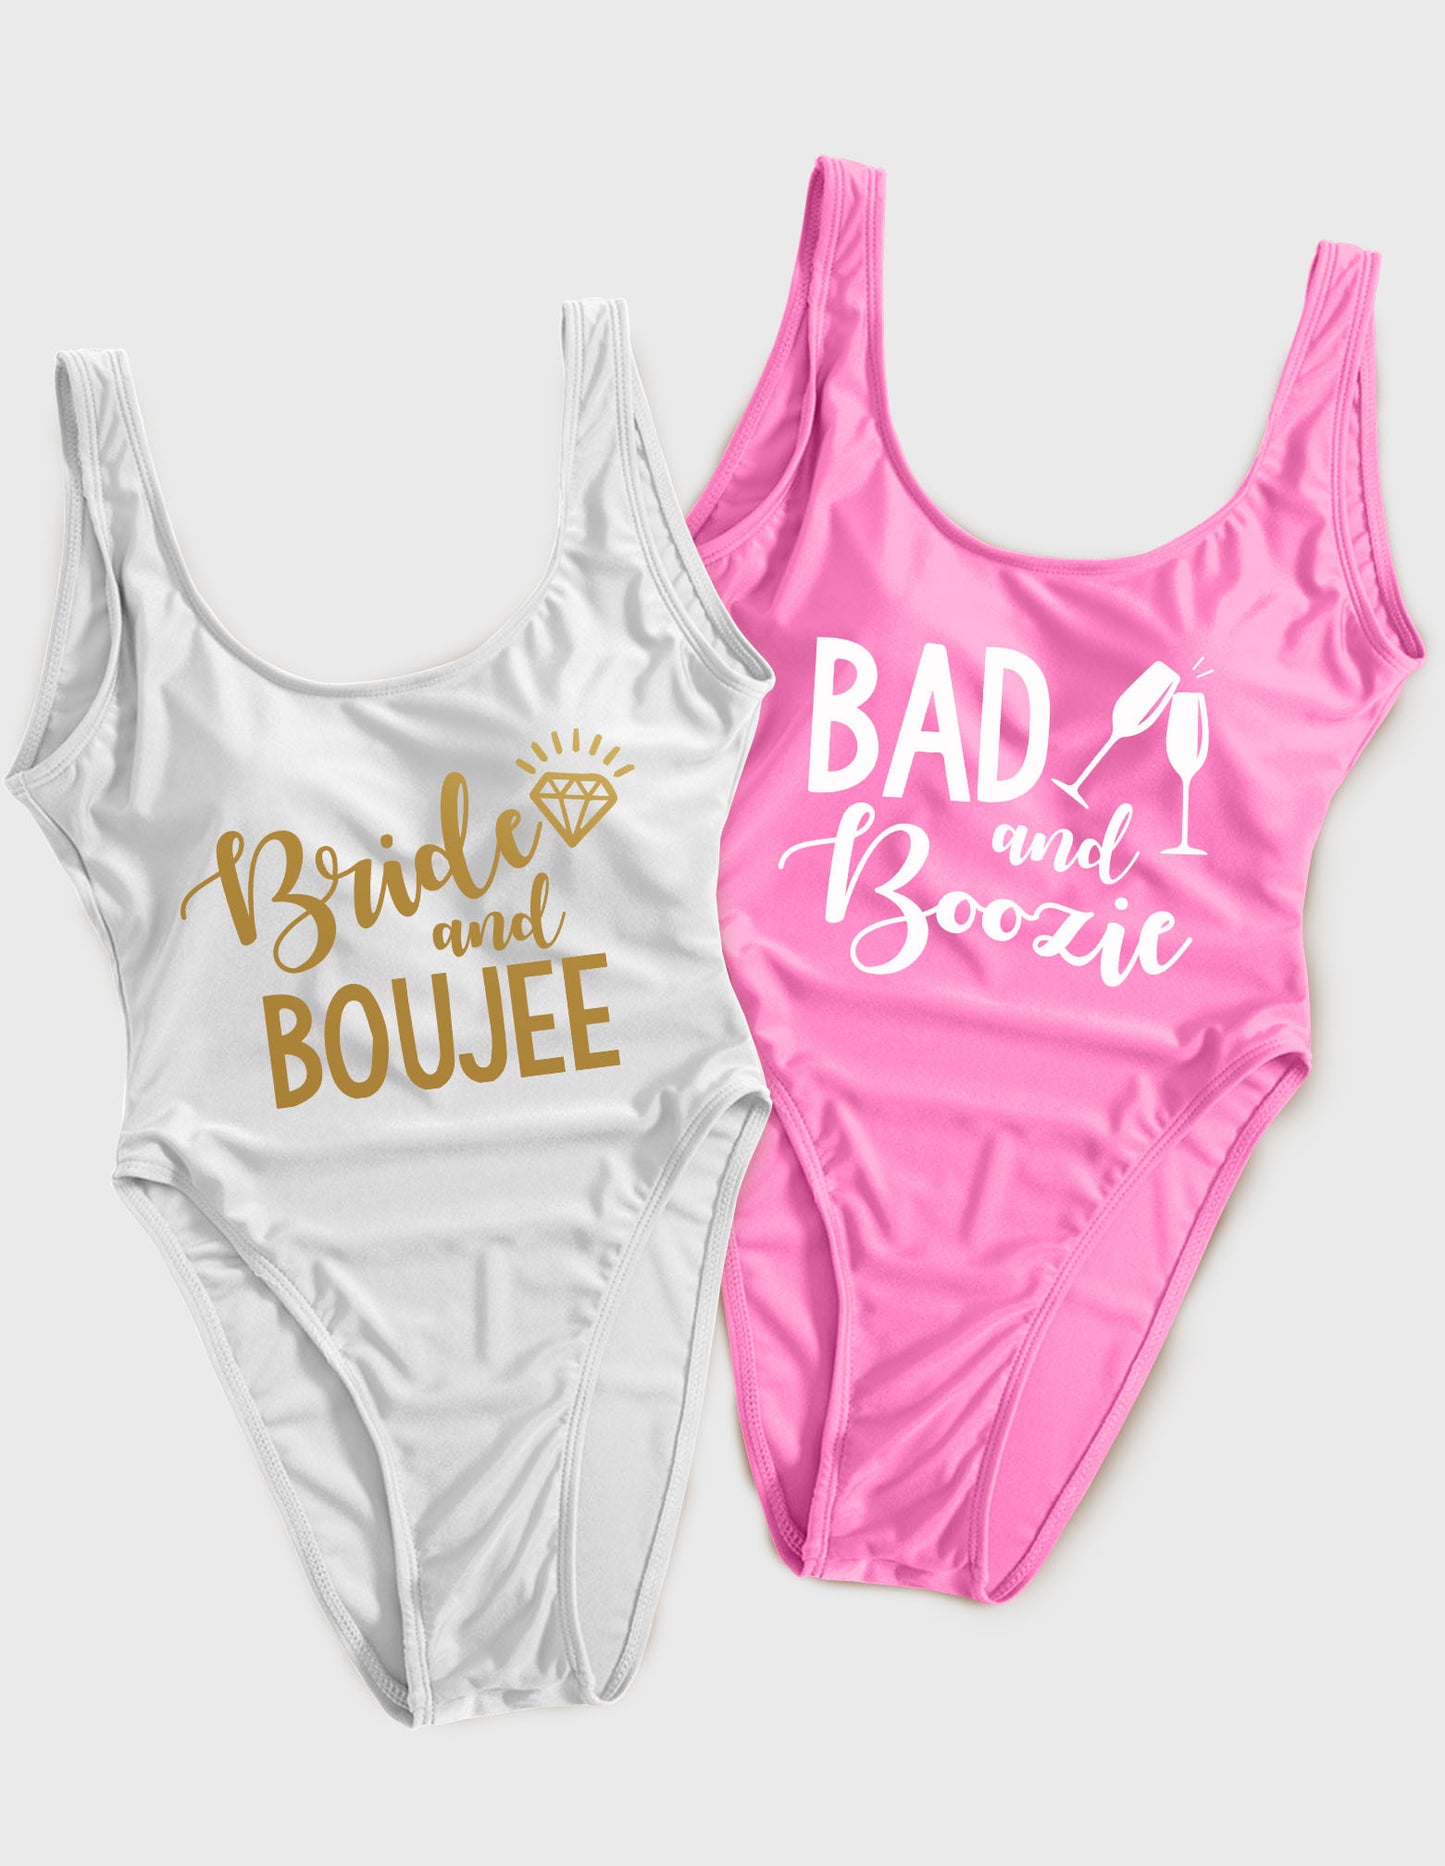 Bride and Boujee & Bad and Boozie Bride Swimsuit